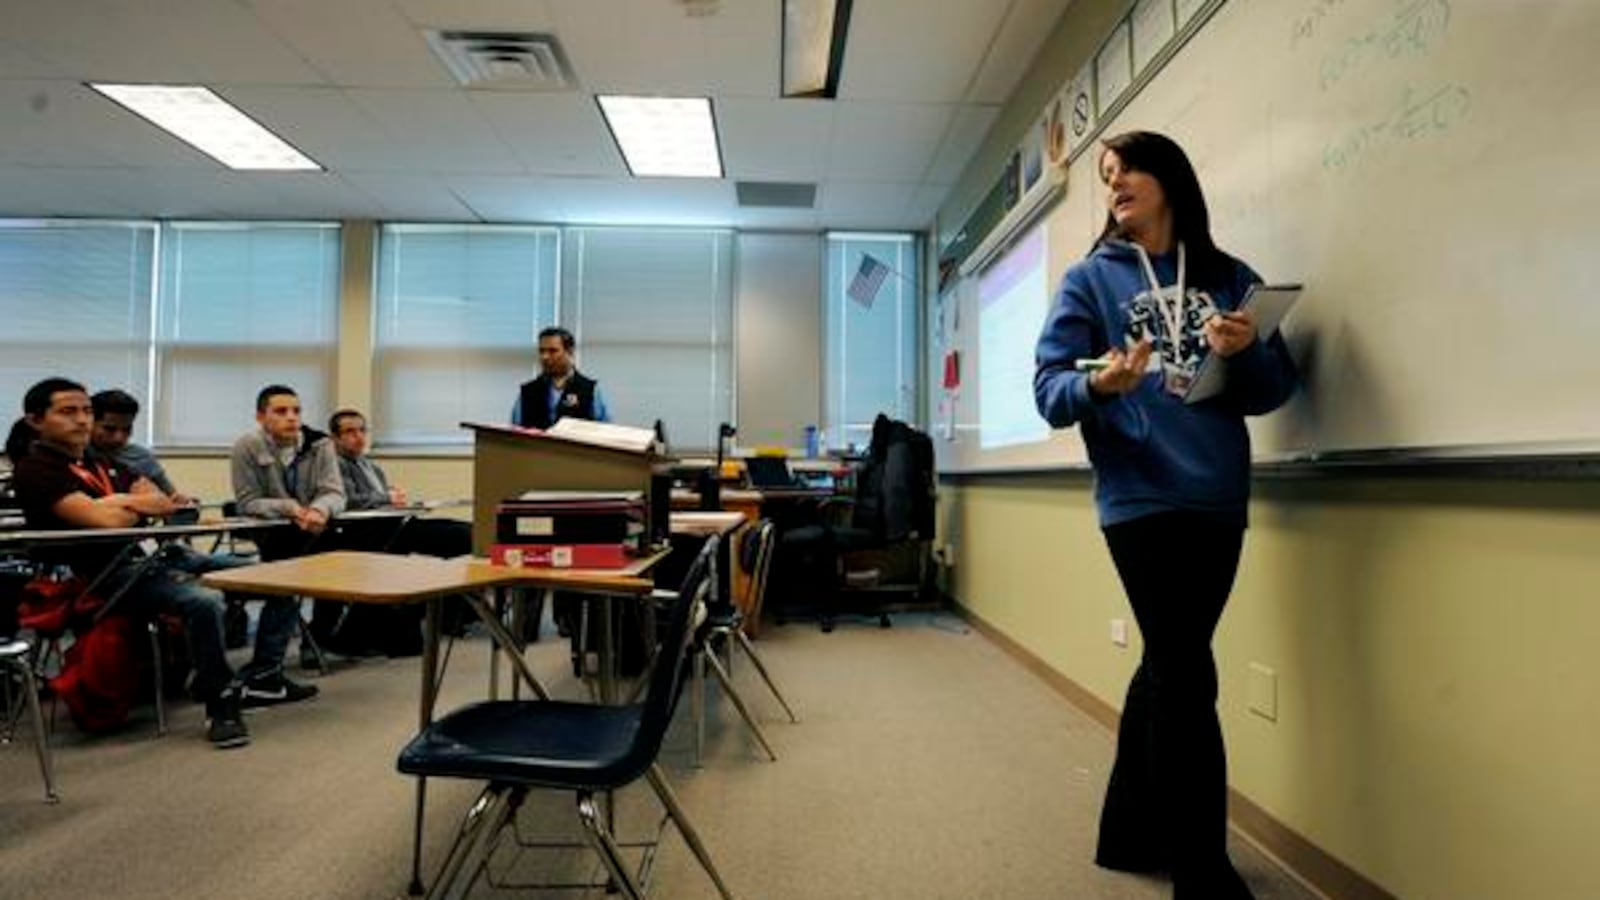 A college algebra course at Hinkley High School in Aurora. (Photo by Jamie Cotten, Special to The Denver Post).